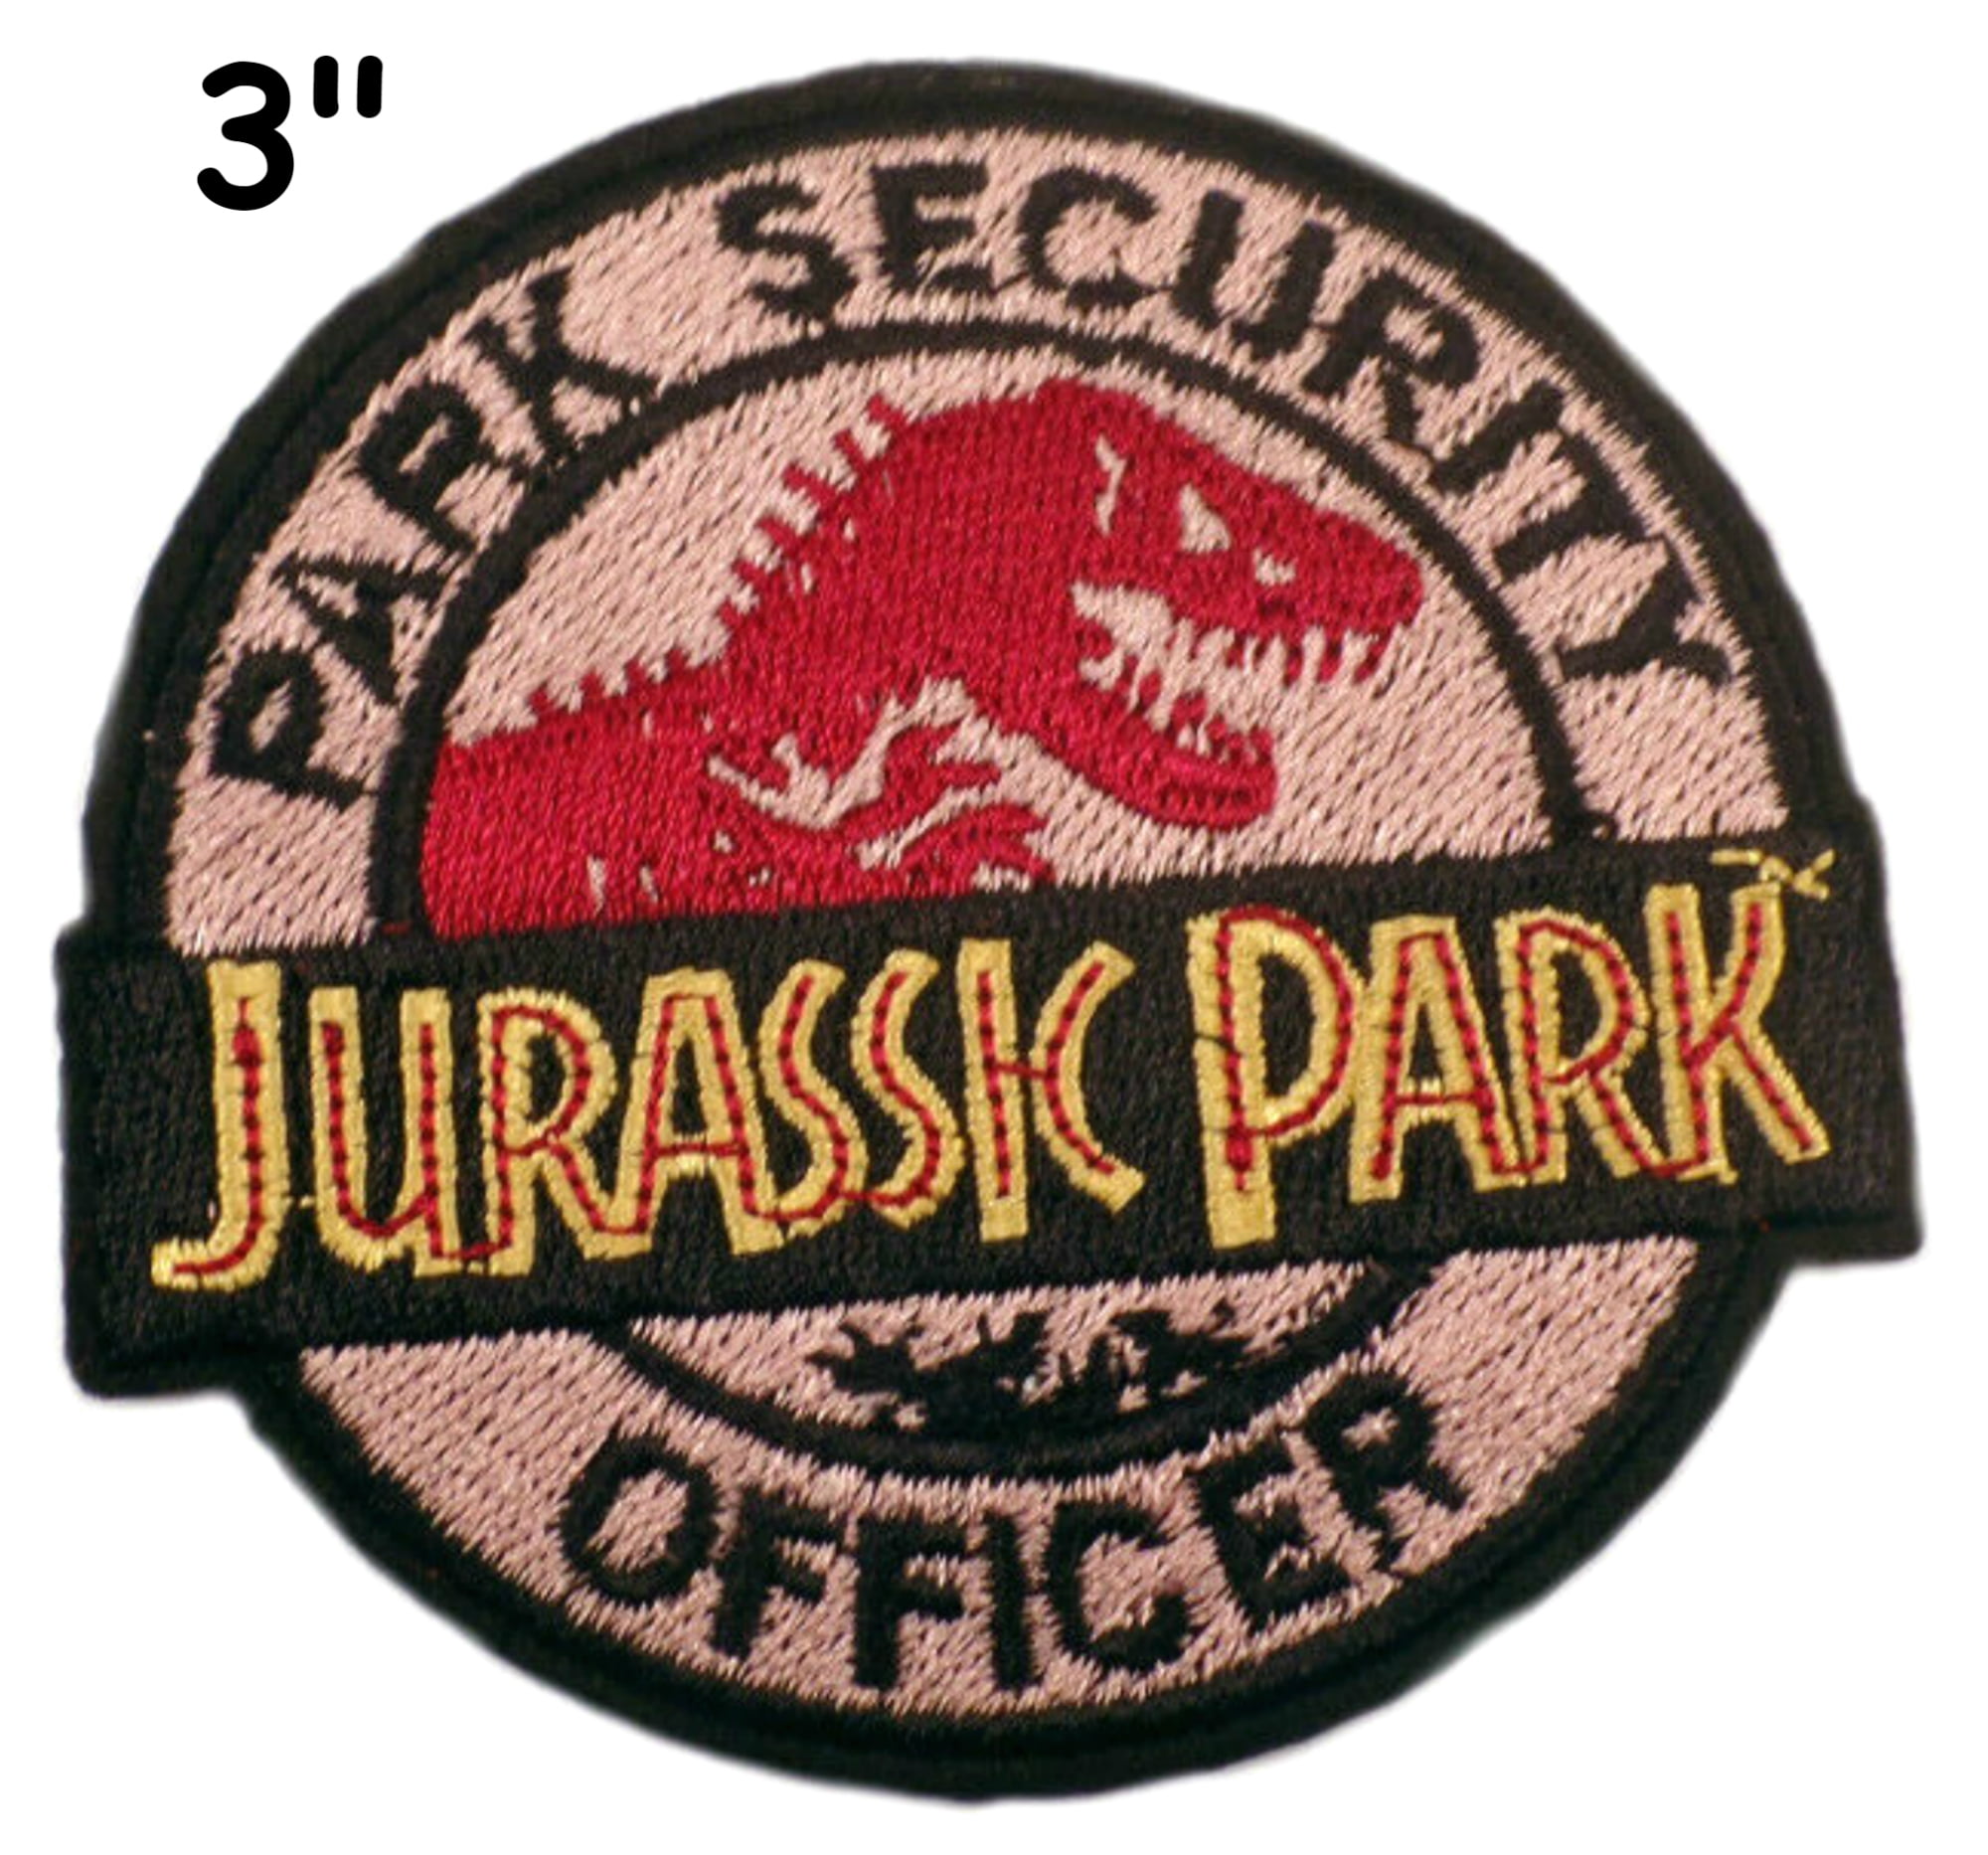 JURASSIC WORLD PATCH EMBROIDERED IRON OR SEW ON MOVIE GAME APPLIQUE BADGE 